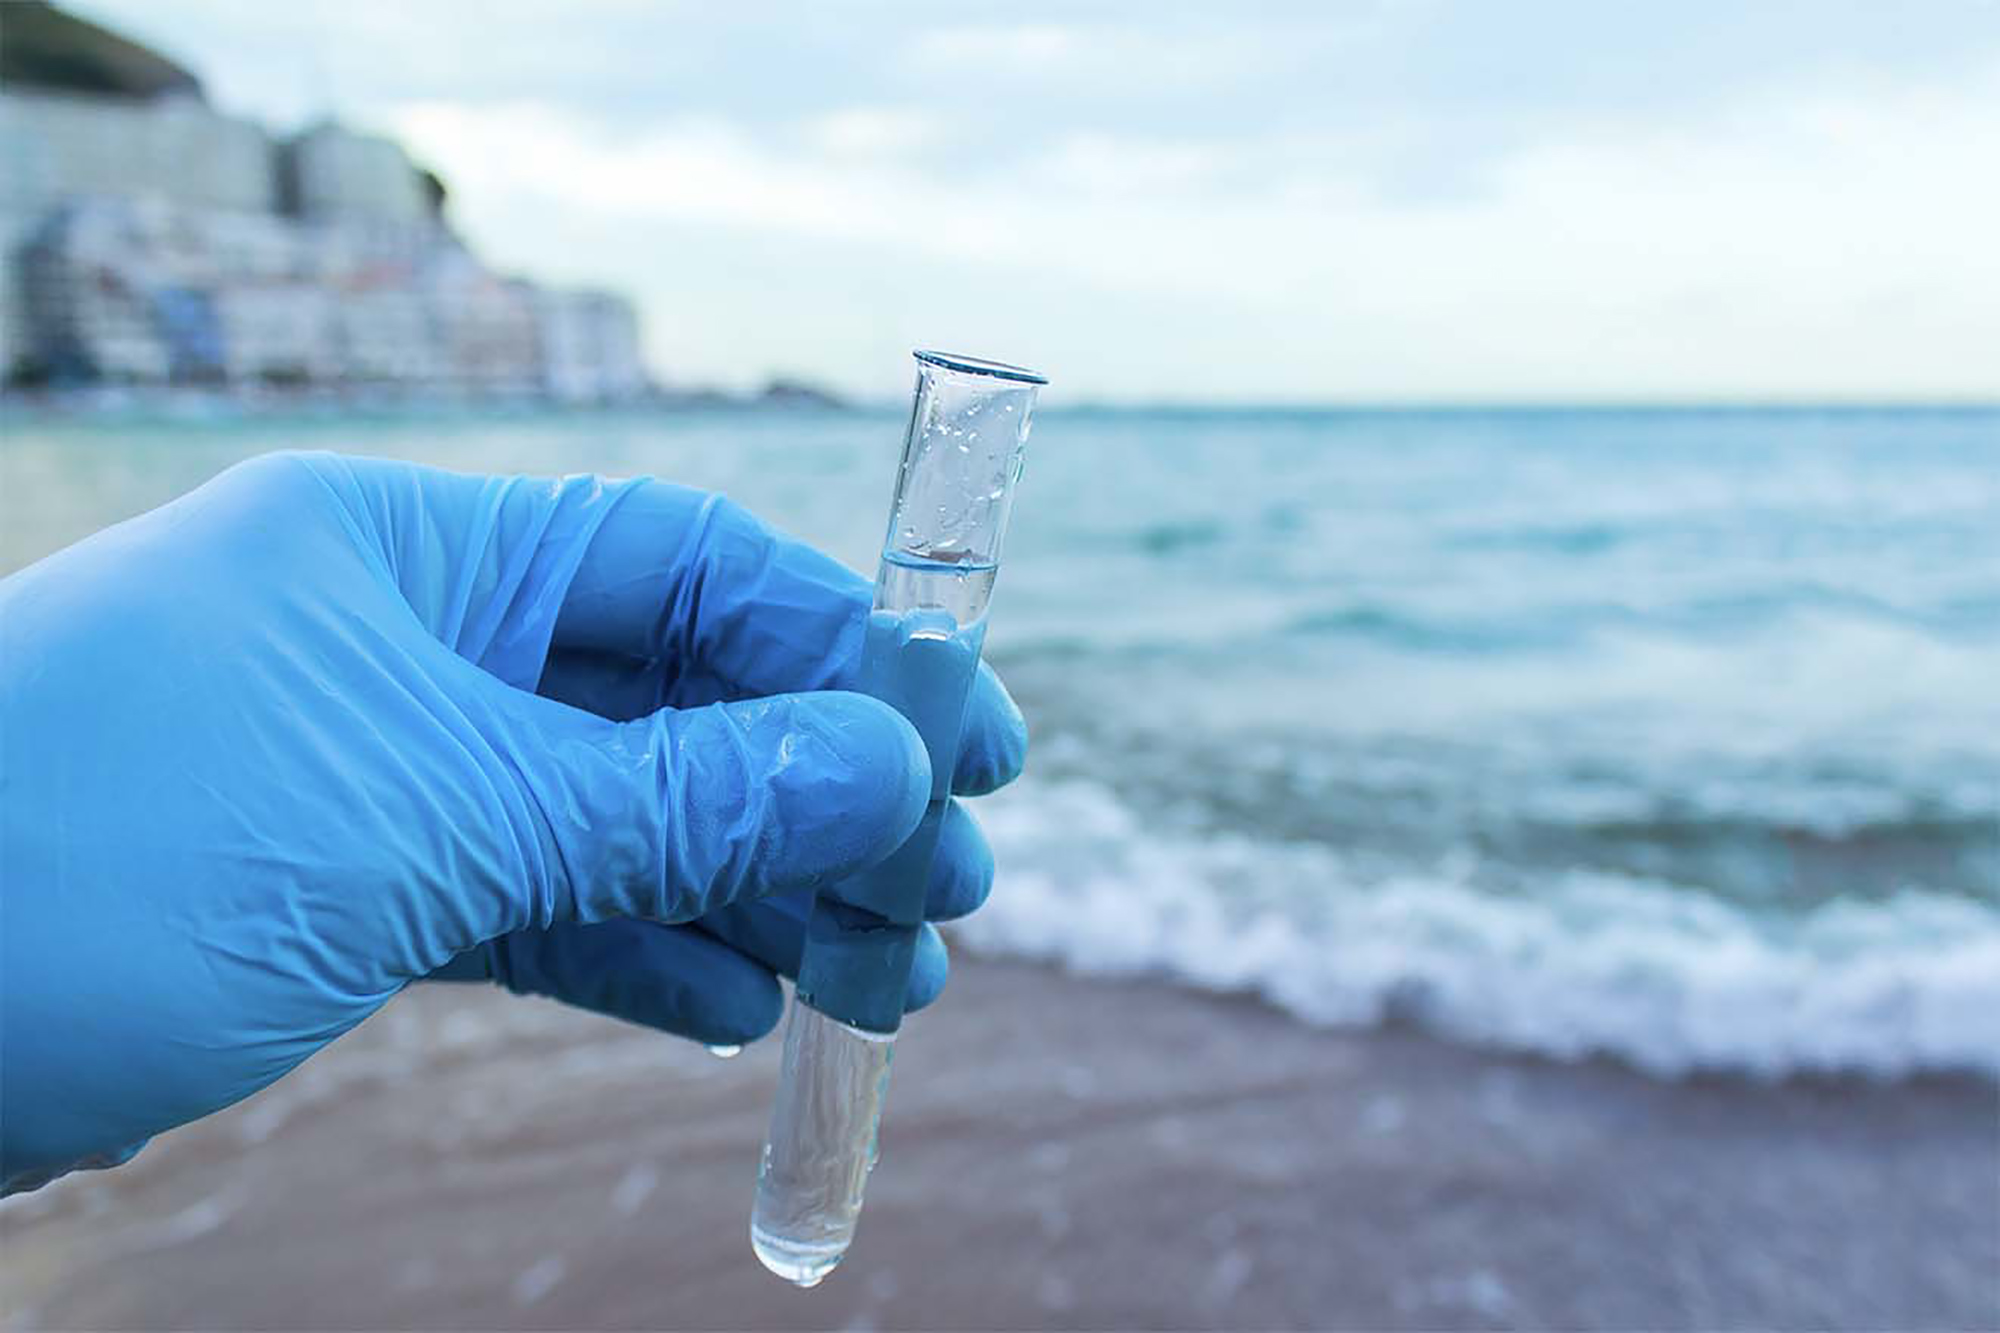 A hand wearing a glove holds a test tube on a beach.